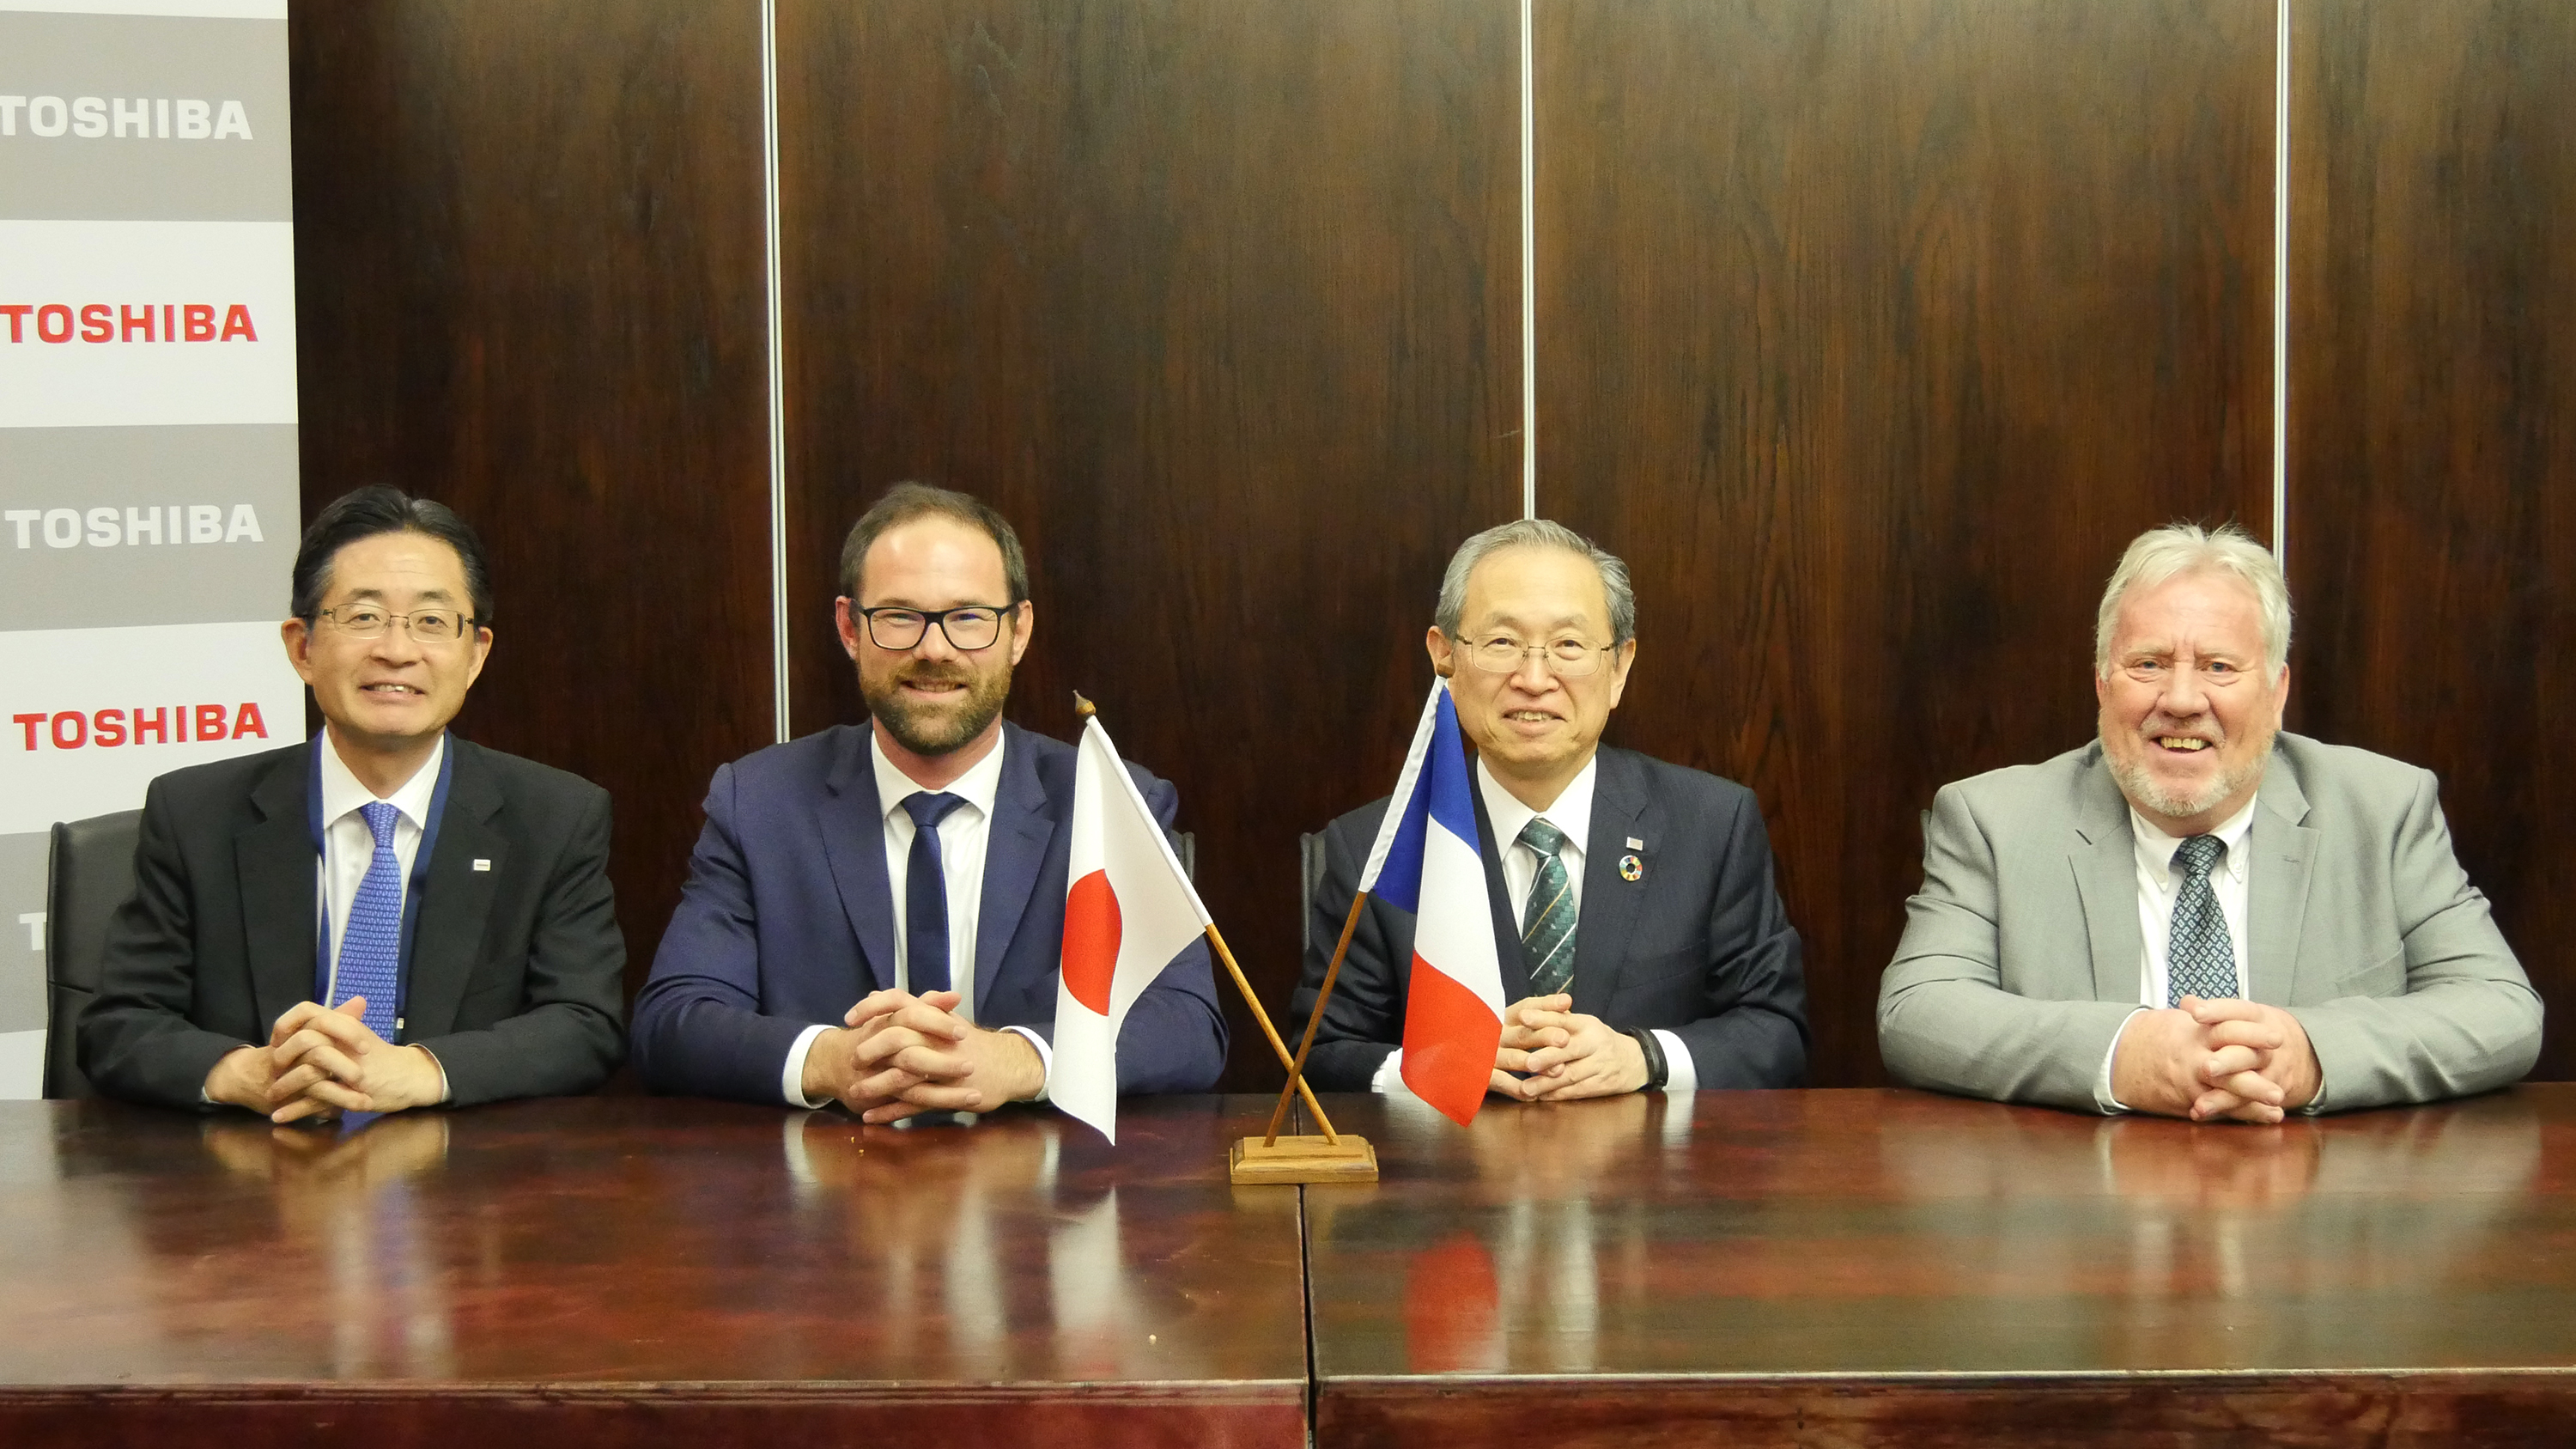 From left to right, Toyoaki Fujita, Business Development Executive of Toshiba Energy Systems & Solutions Corporation, Mathieu Augereau, Strategic Marketing Director of VINCI Construction, Satoshi Tsunakawa, President and Chief Operating Officer of Toshiba, Gwilym Owen, Representative of VINCI Construction Grands Projets in South Africa